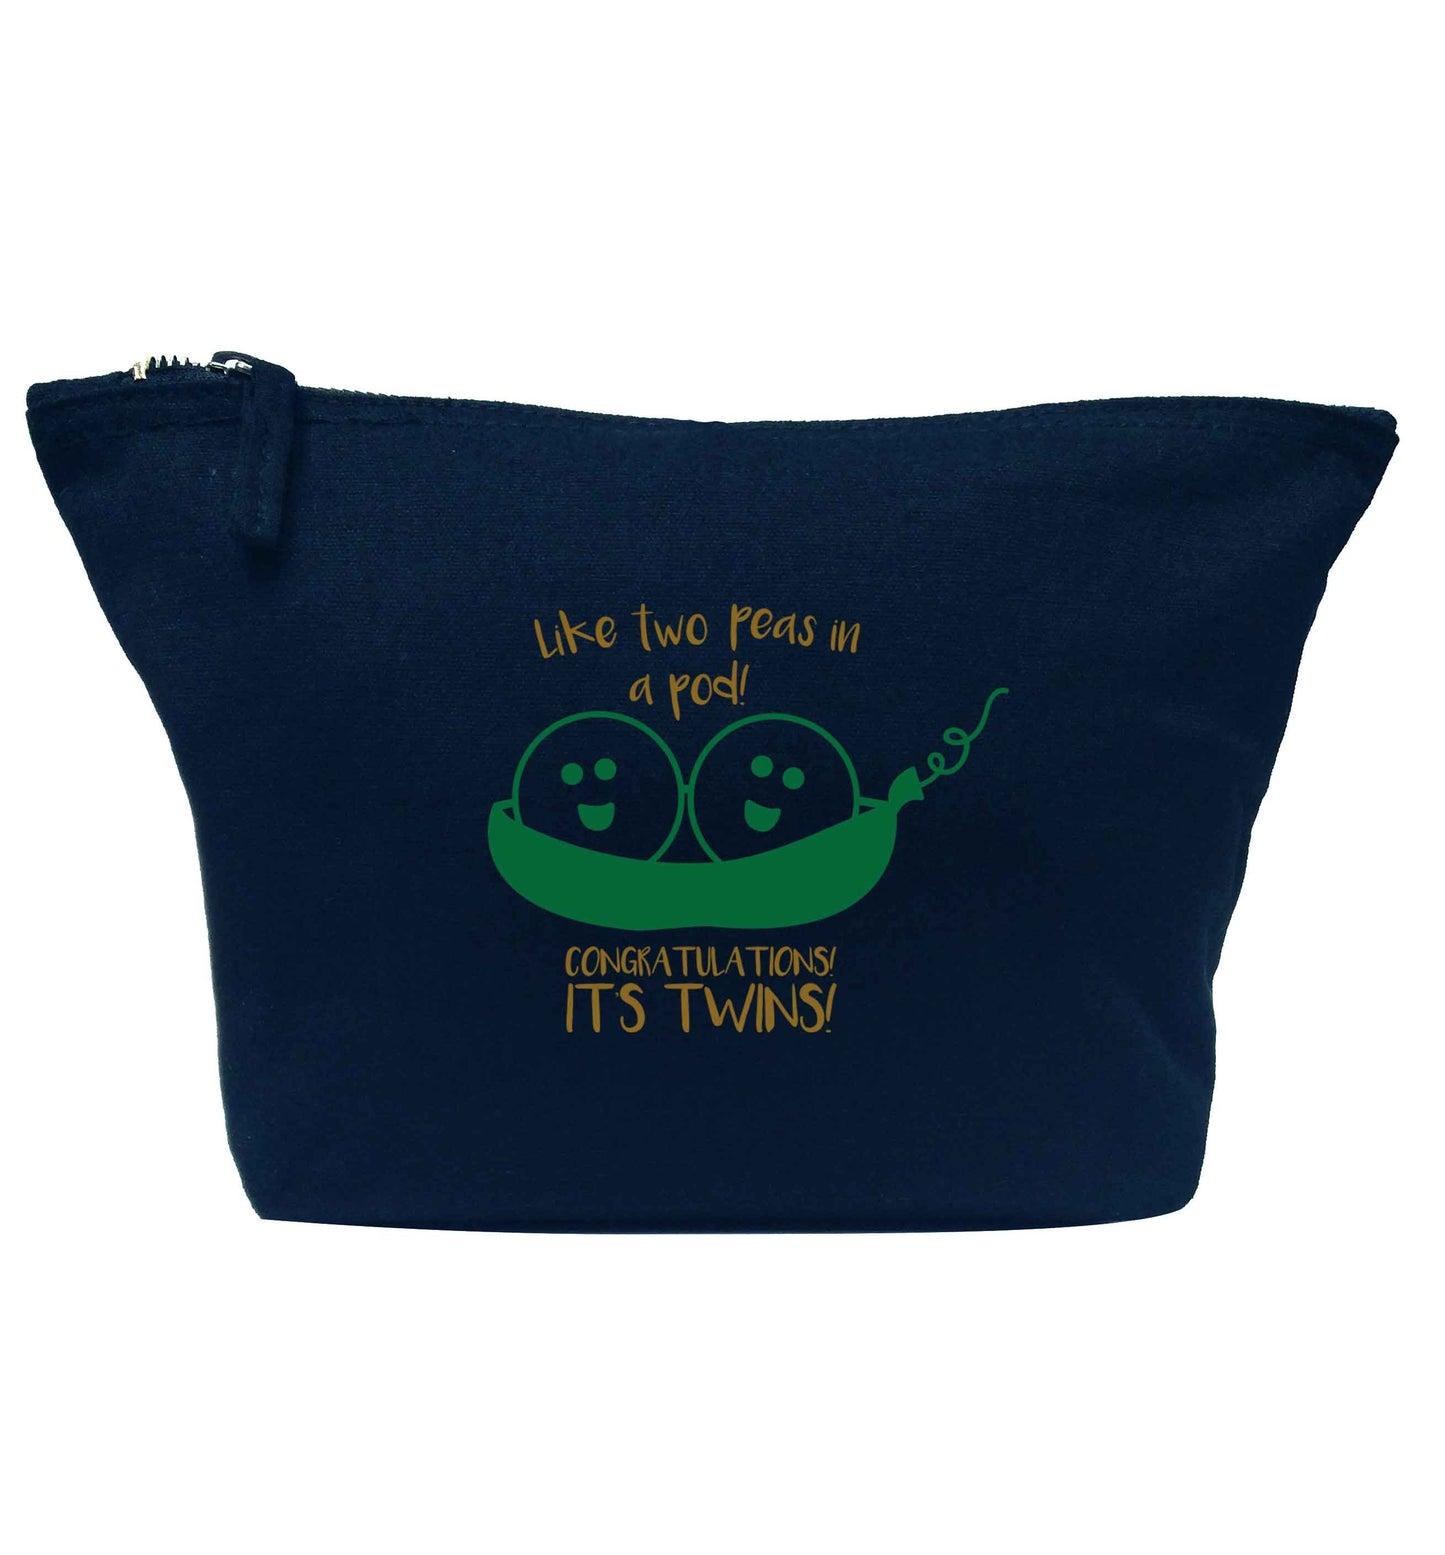 Like two peas in a pod! Congratulations it's twins! navy makeup bag